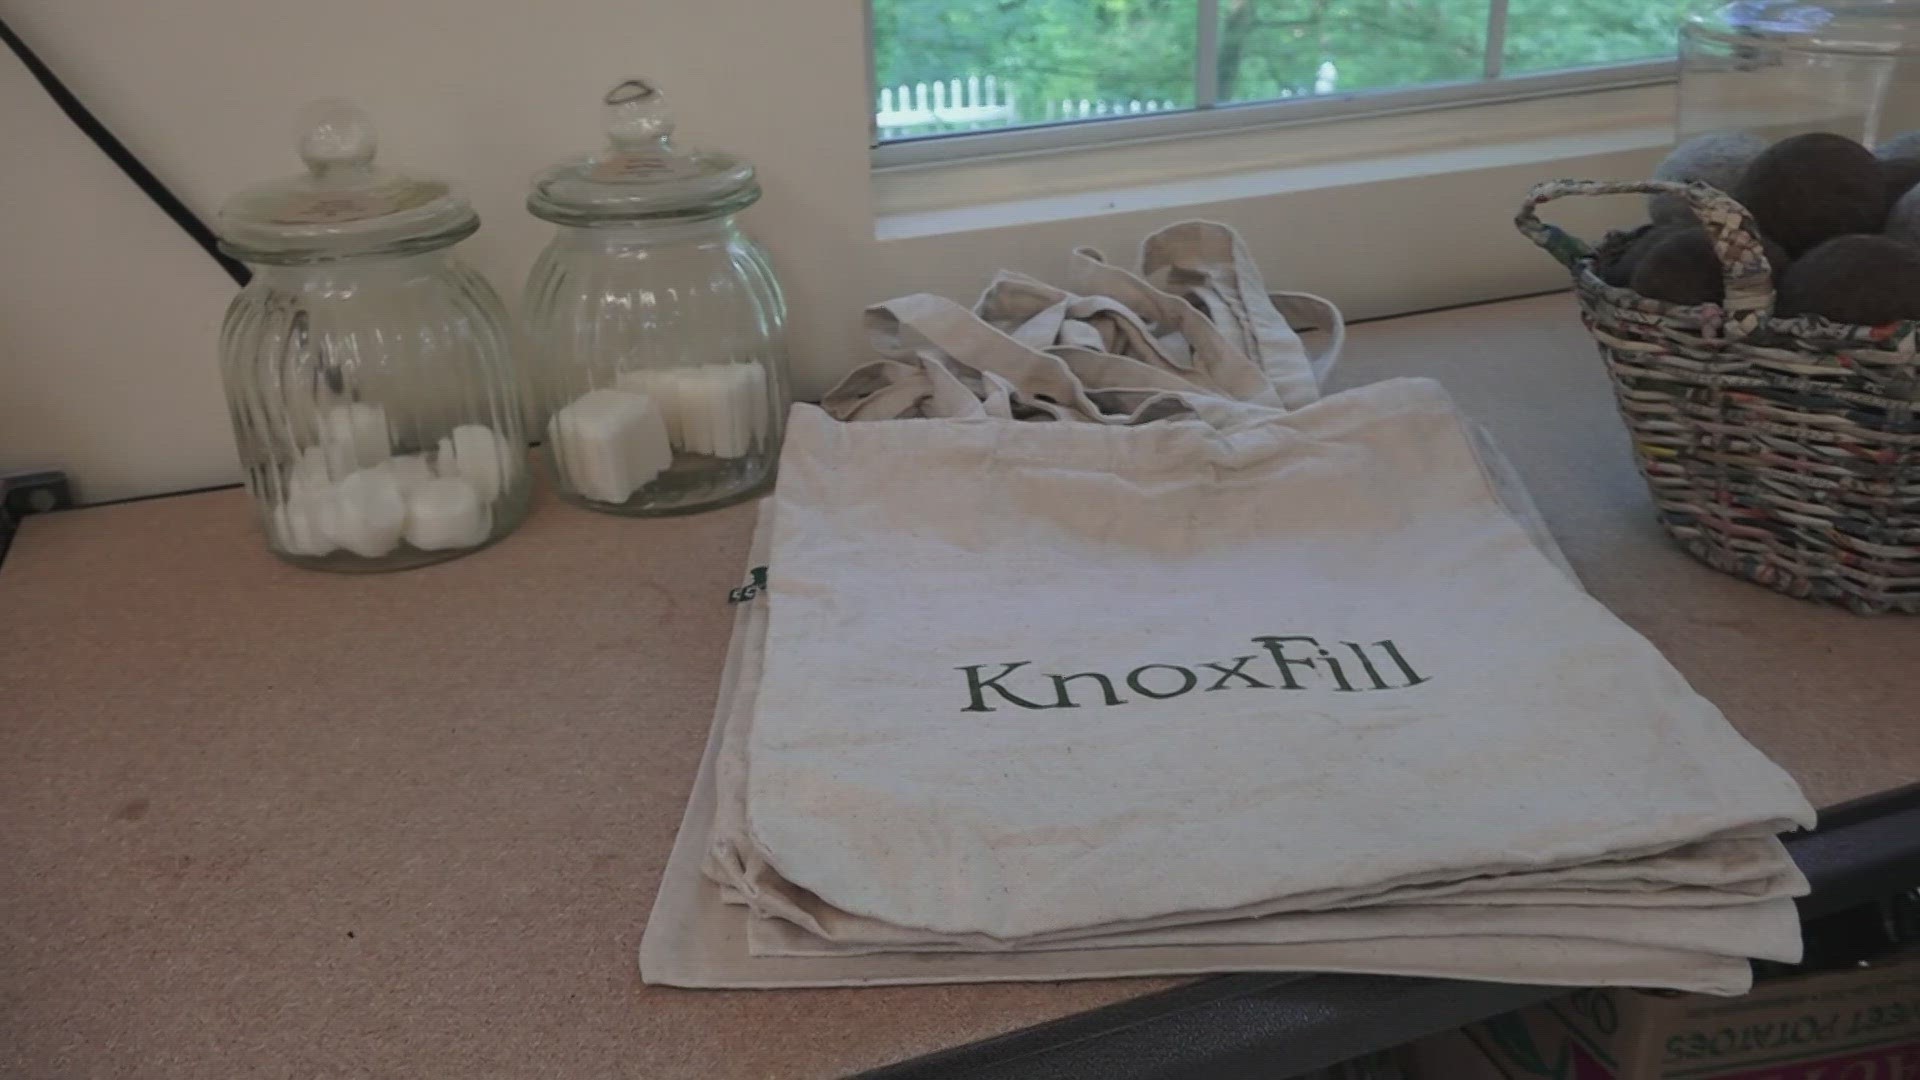 Saturday is the grand opening for South Knoxville's newest sustainable storefront, KnoxFill.